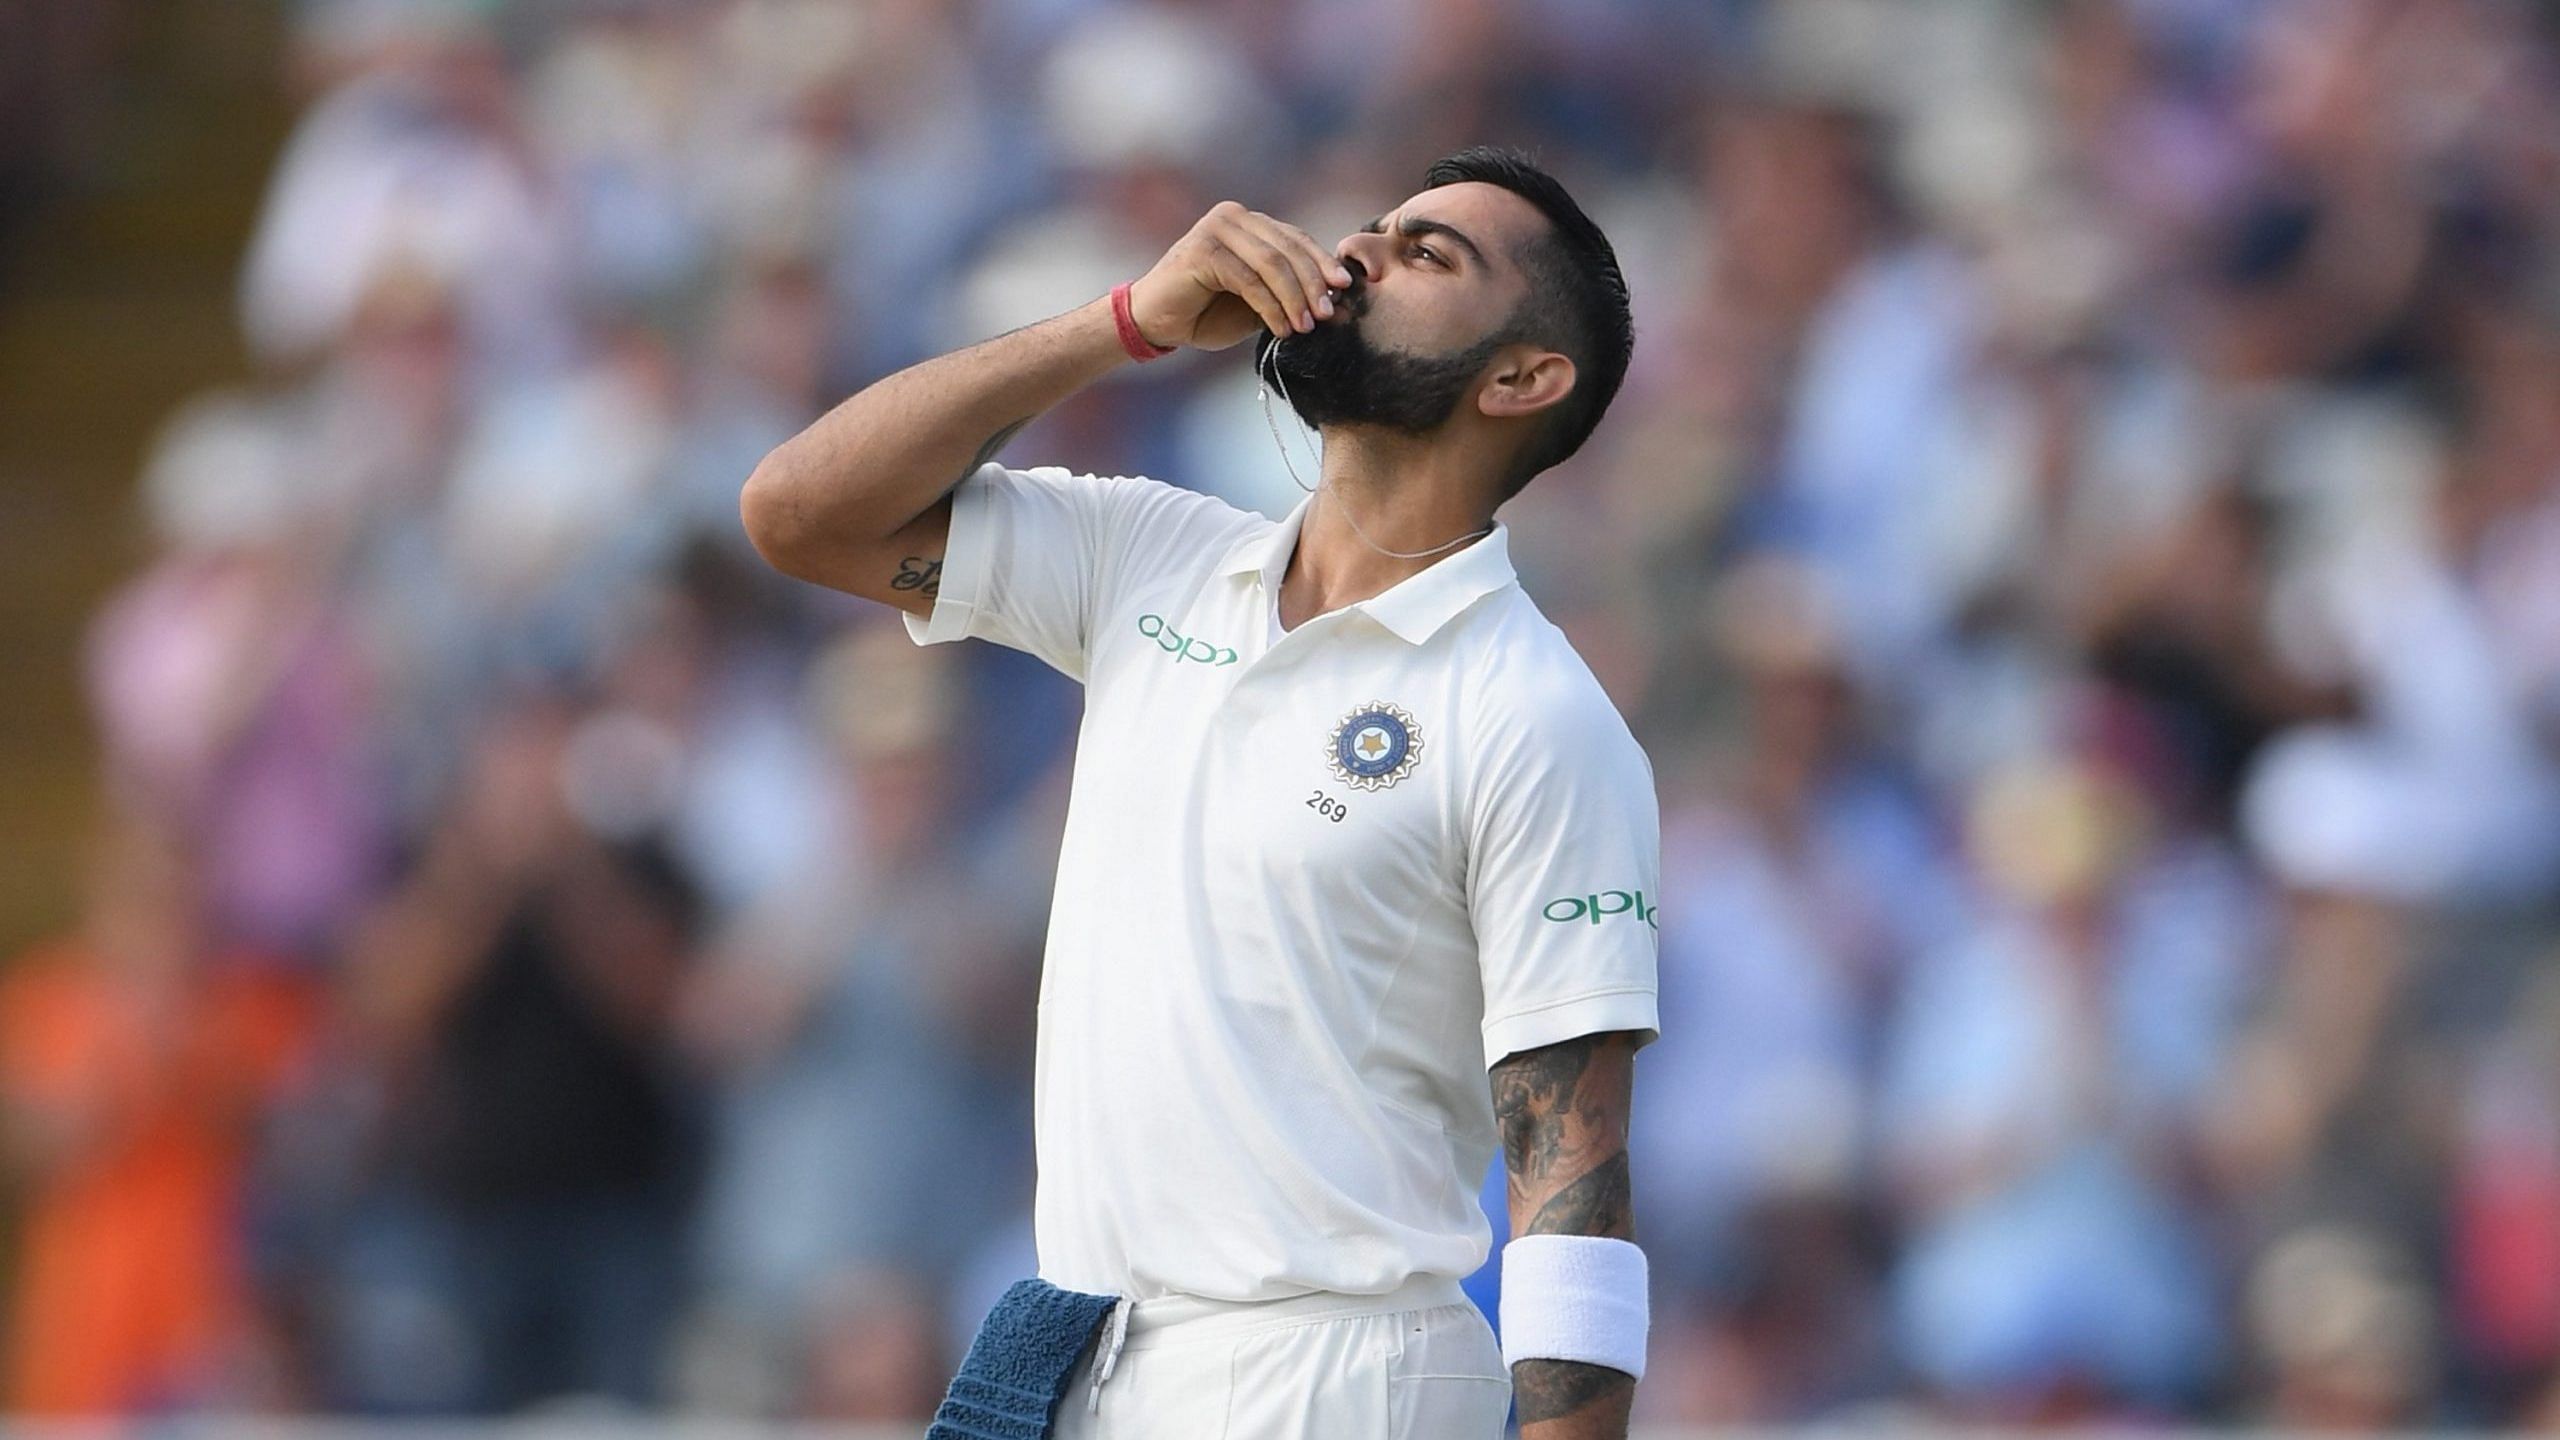 Brand Virat Kohli and how he became the worlds most marketable cricketer